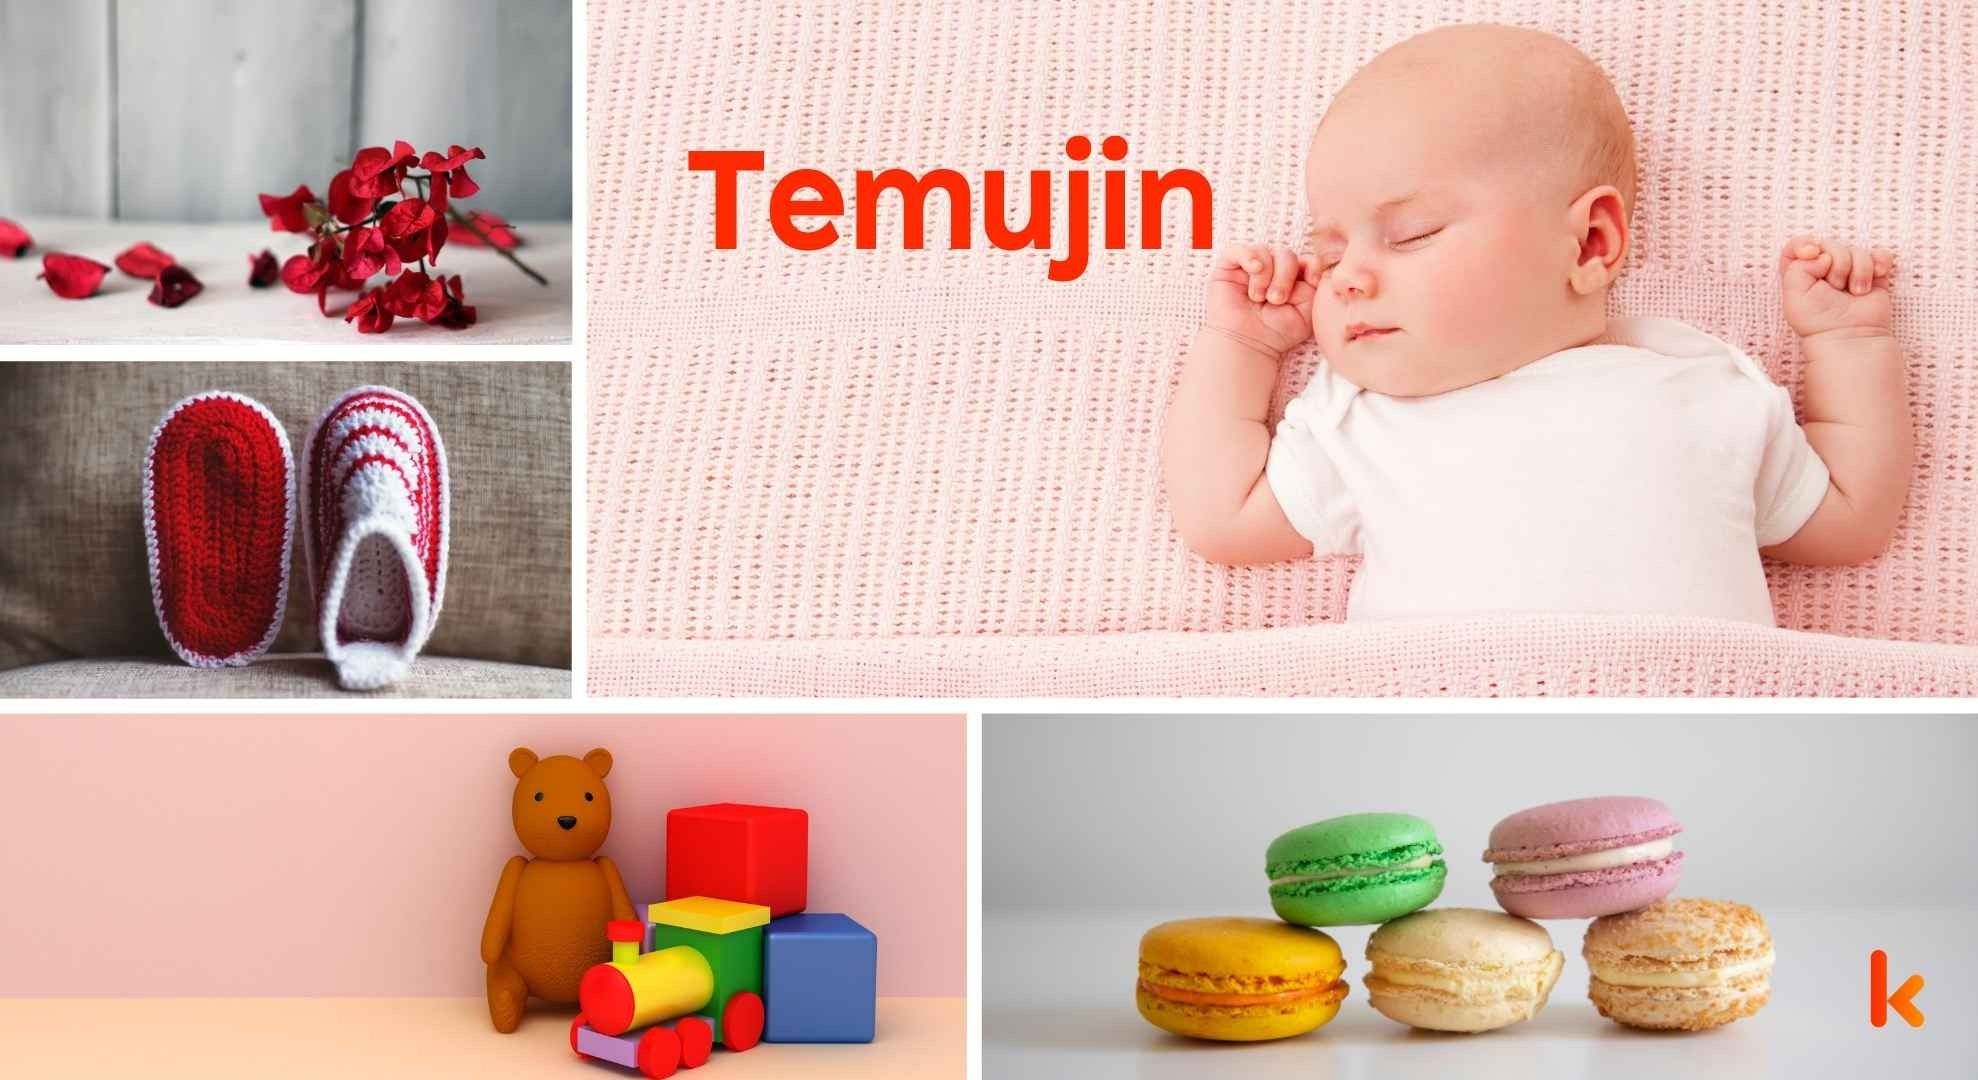 Meaning of the name Temujin